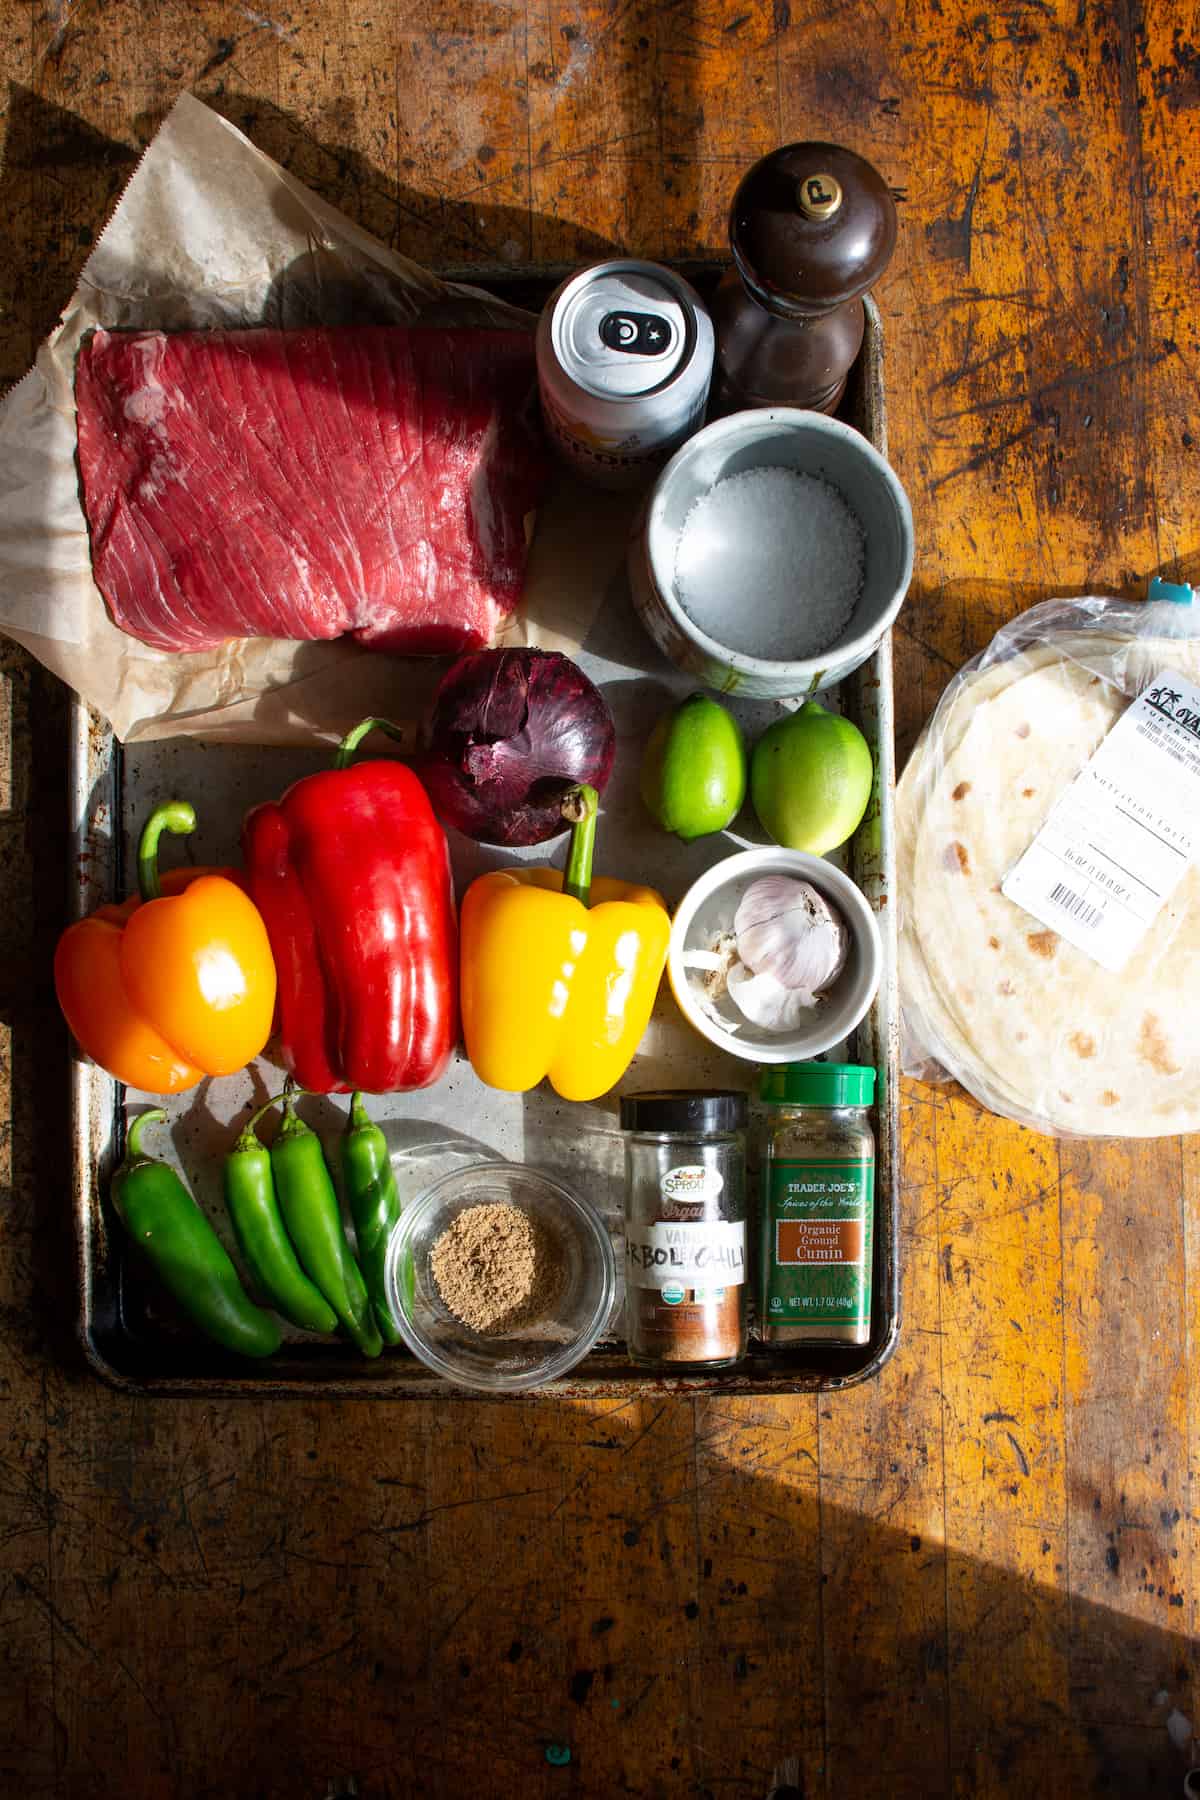 All the ingredients to make steak fajitas including flank steak, beer, pepper, salt, red onion, limes, bell peppers, and more. 